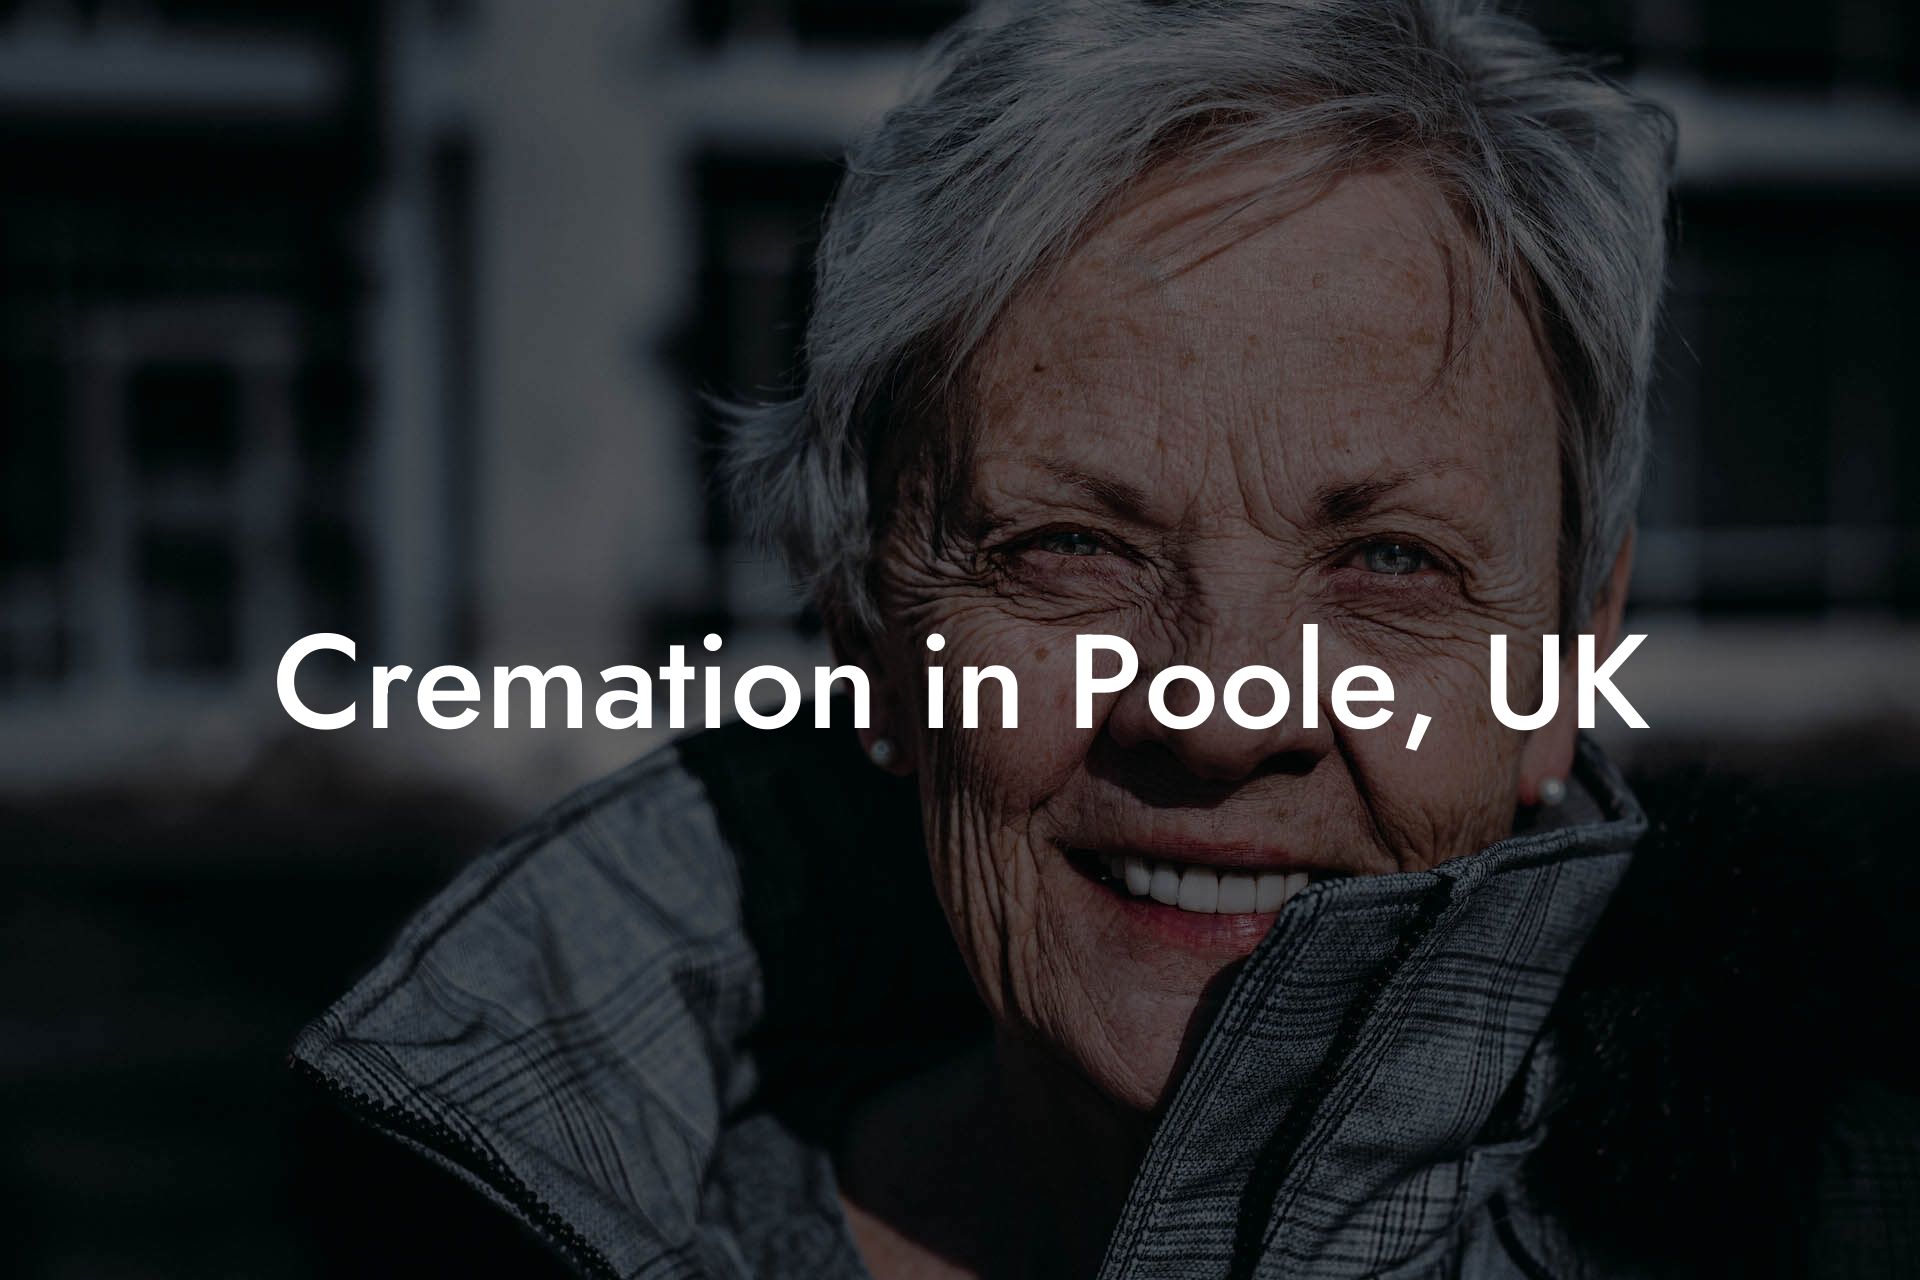 Cremation in Poole, UK